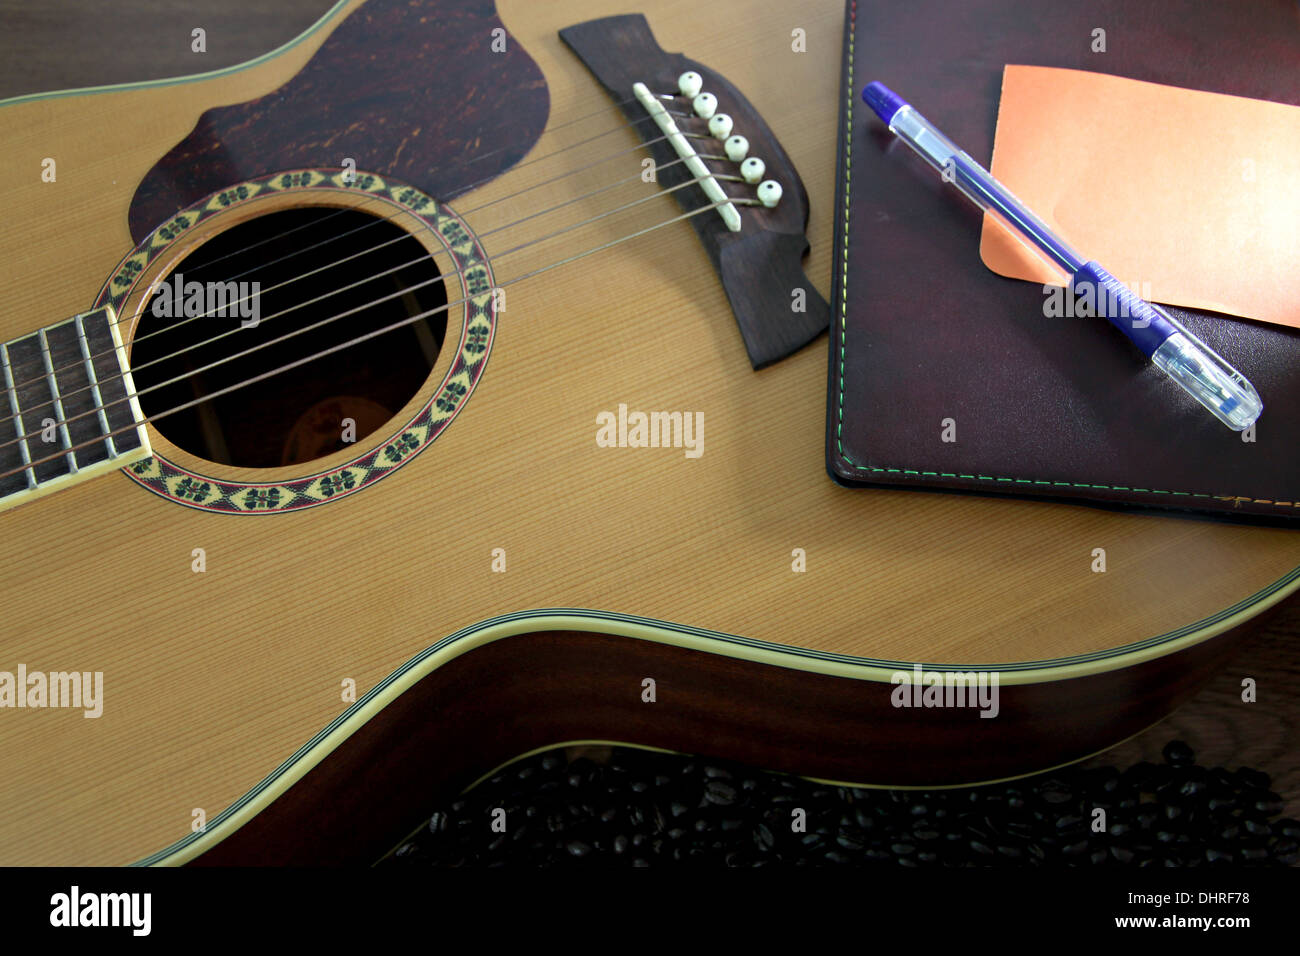 The Picture Focus Notebook and Pen resting on the guitar. Stock Photo